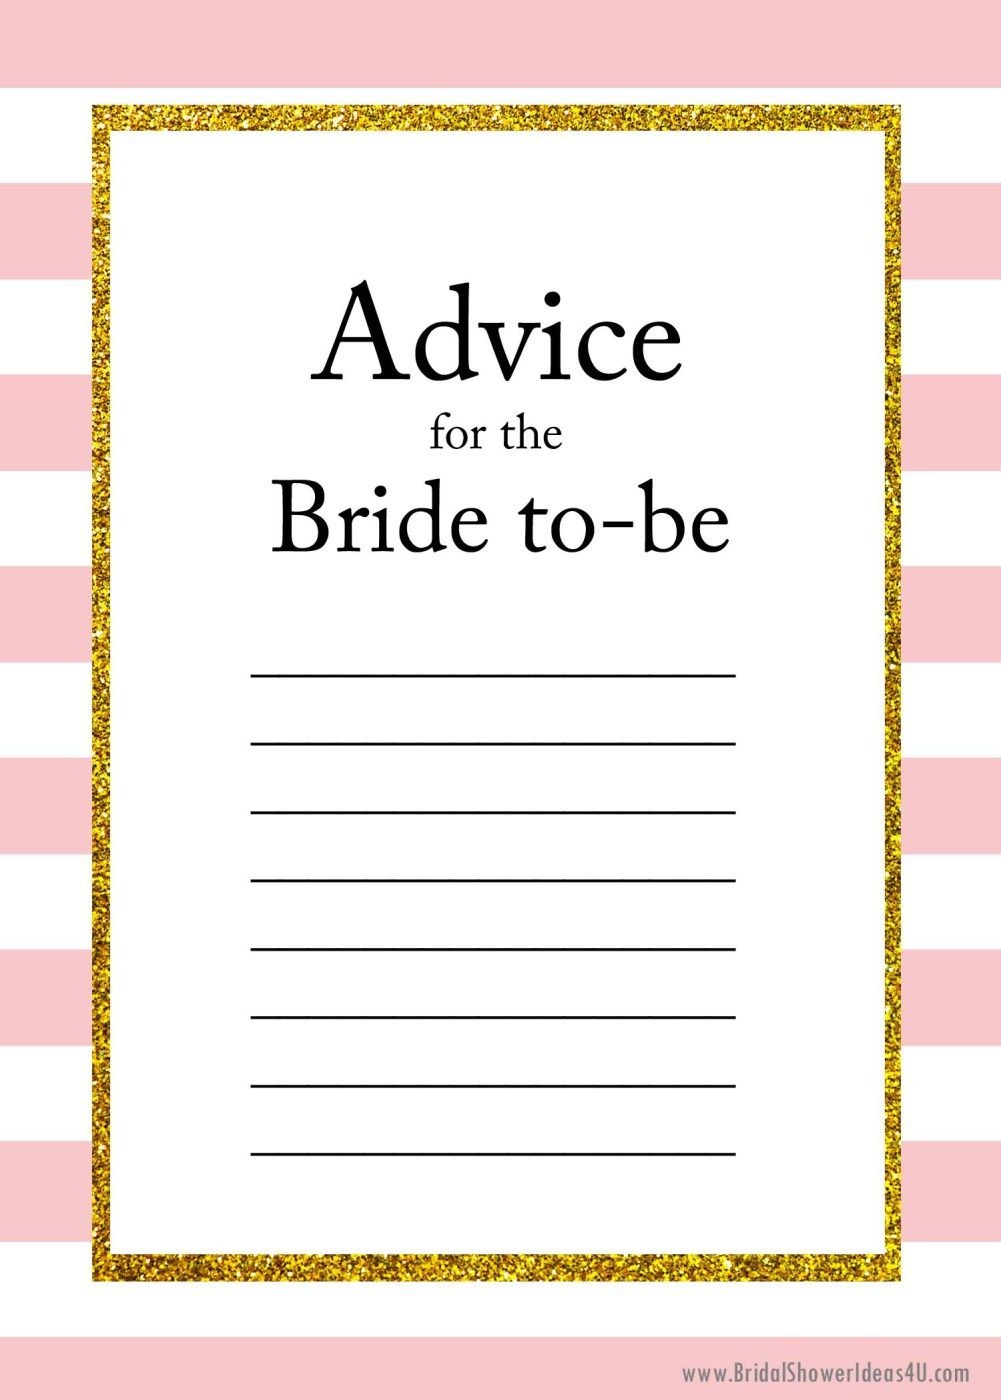 Free Printable Advice For The Bride To Be Cards | Friendship | Bride - Free Printable Bridal Shower Advice Cards